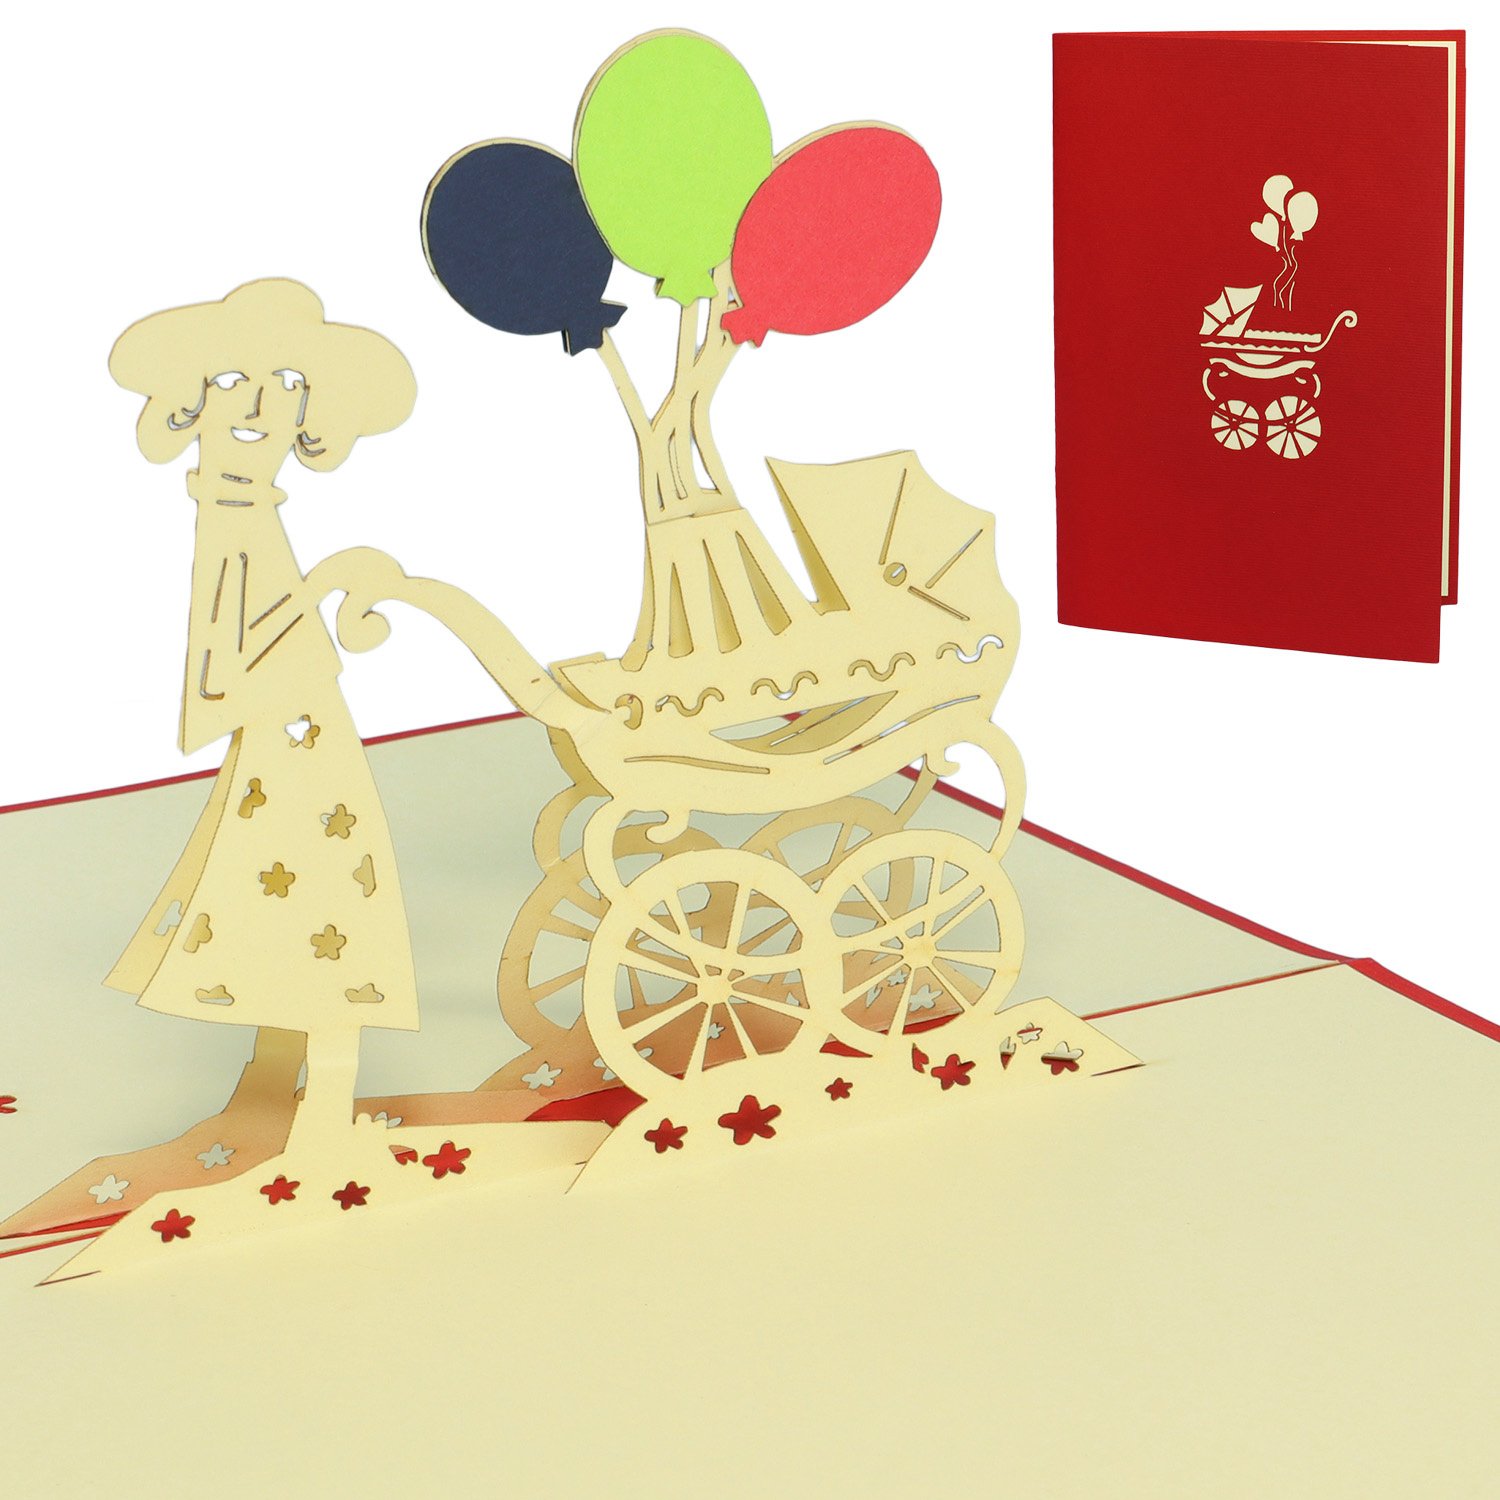 LINPOPUP Pop Up 3D Card, Birth Card, Congratulations on Birth, Stroller Baby Mother, LINPopUp®, N94